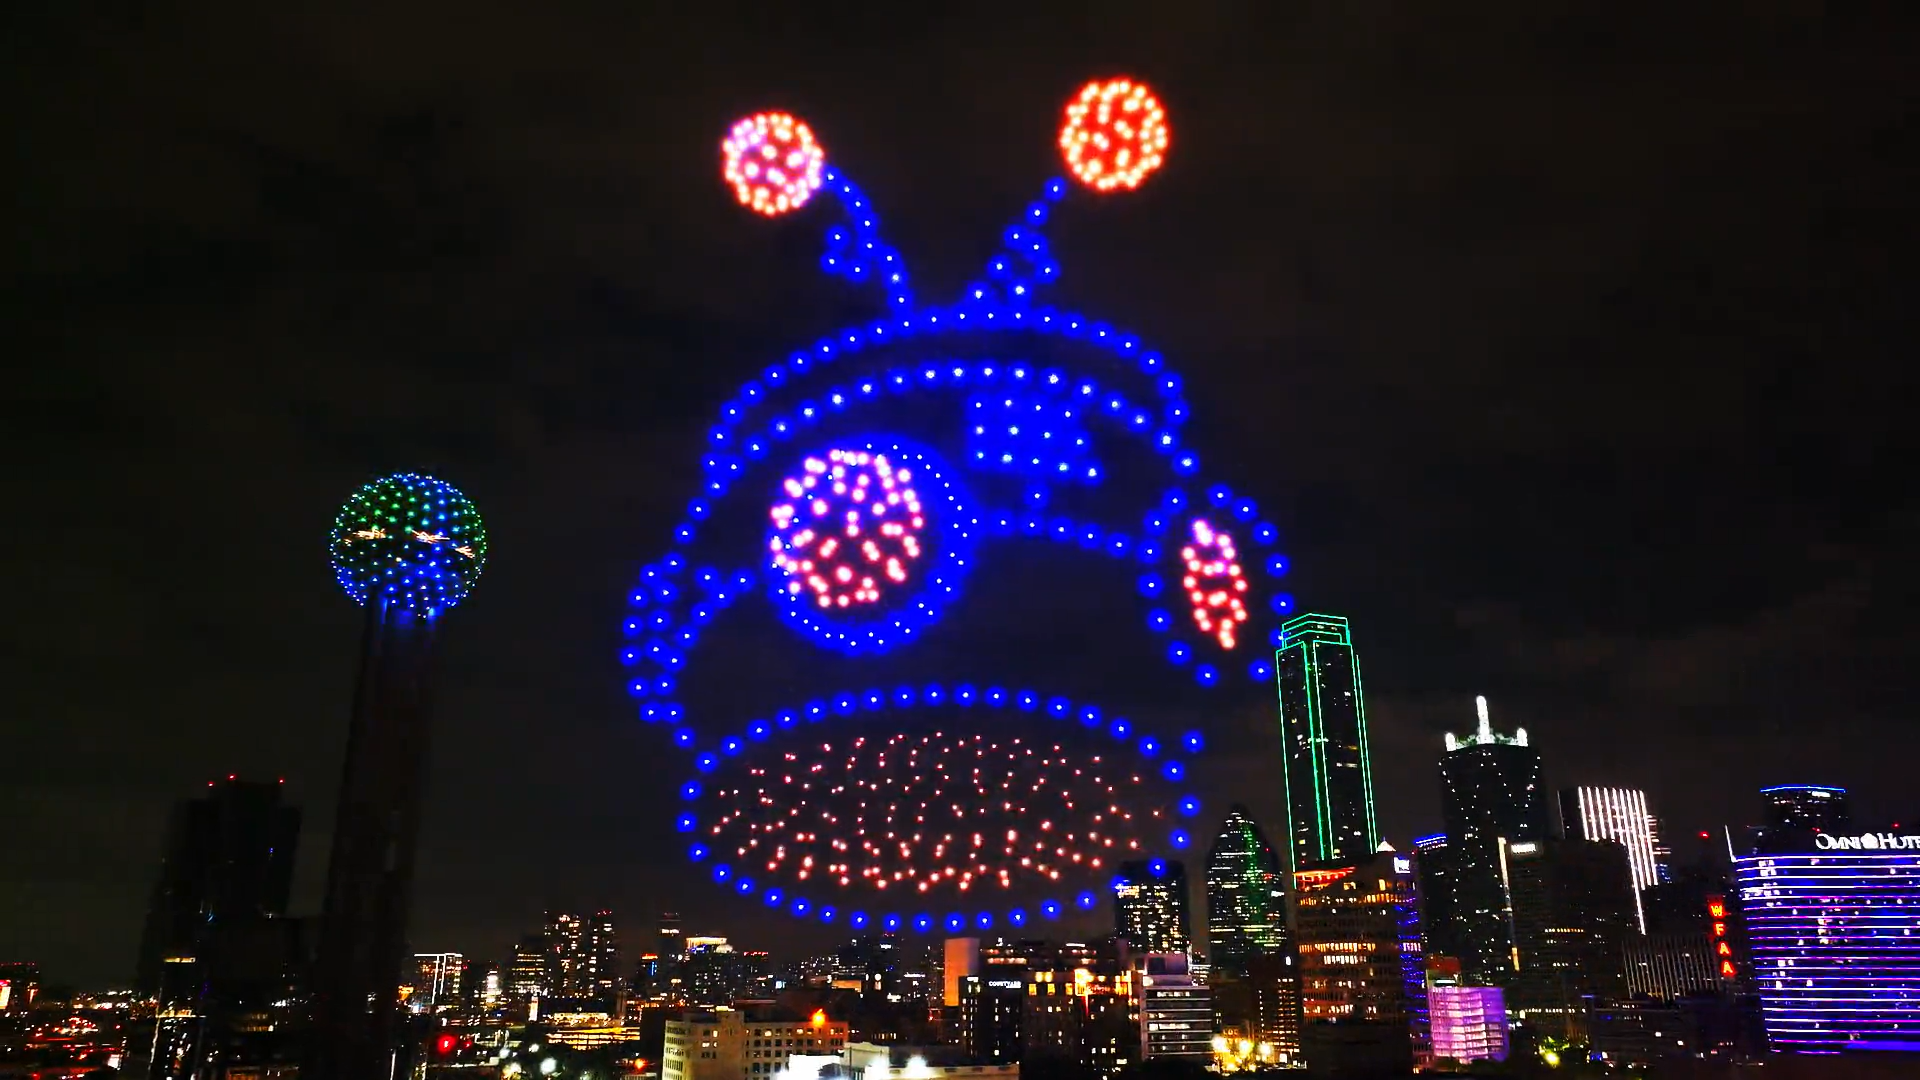 CosMc's alien head appears at Pixis drone light show for Dallas launch event